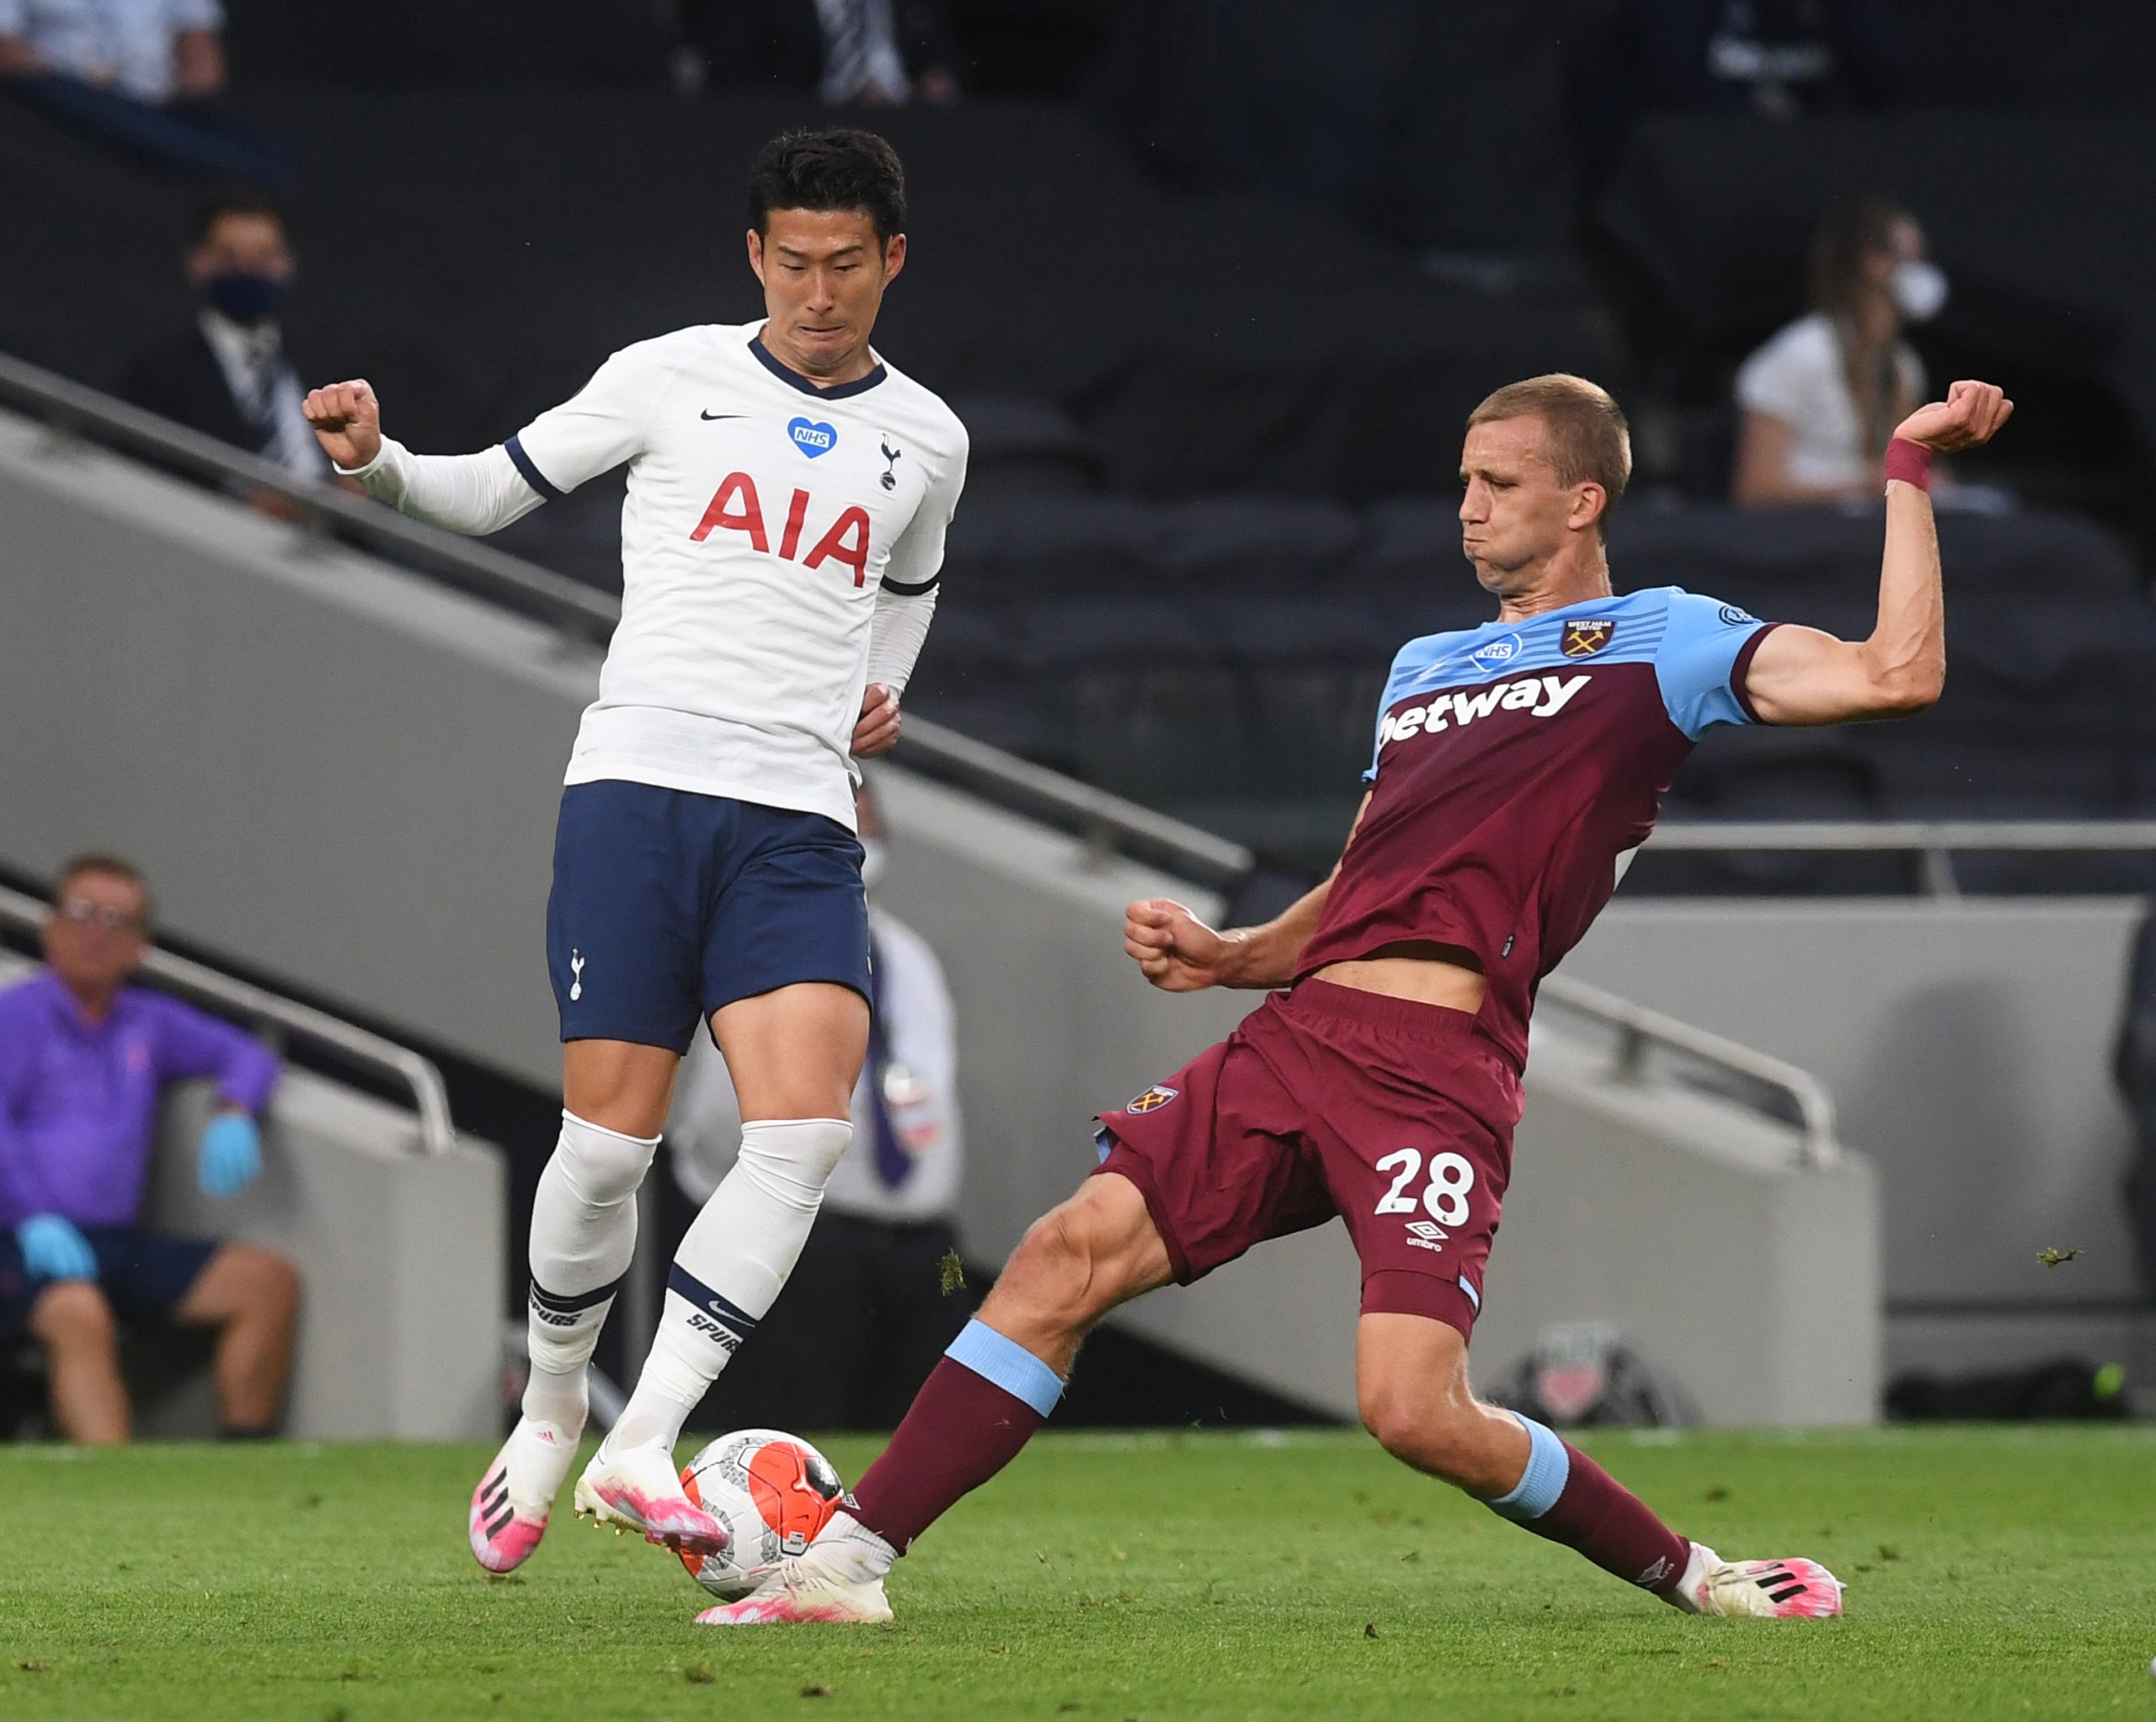 Date, time and broadcast information on the Carabao Cup draw between Tottenham Hotspur and West Ham United